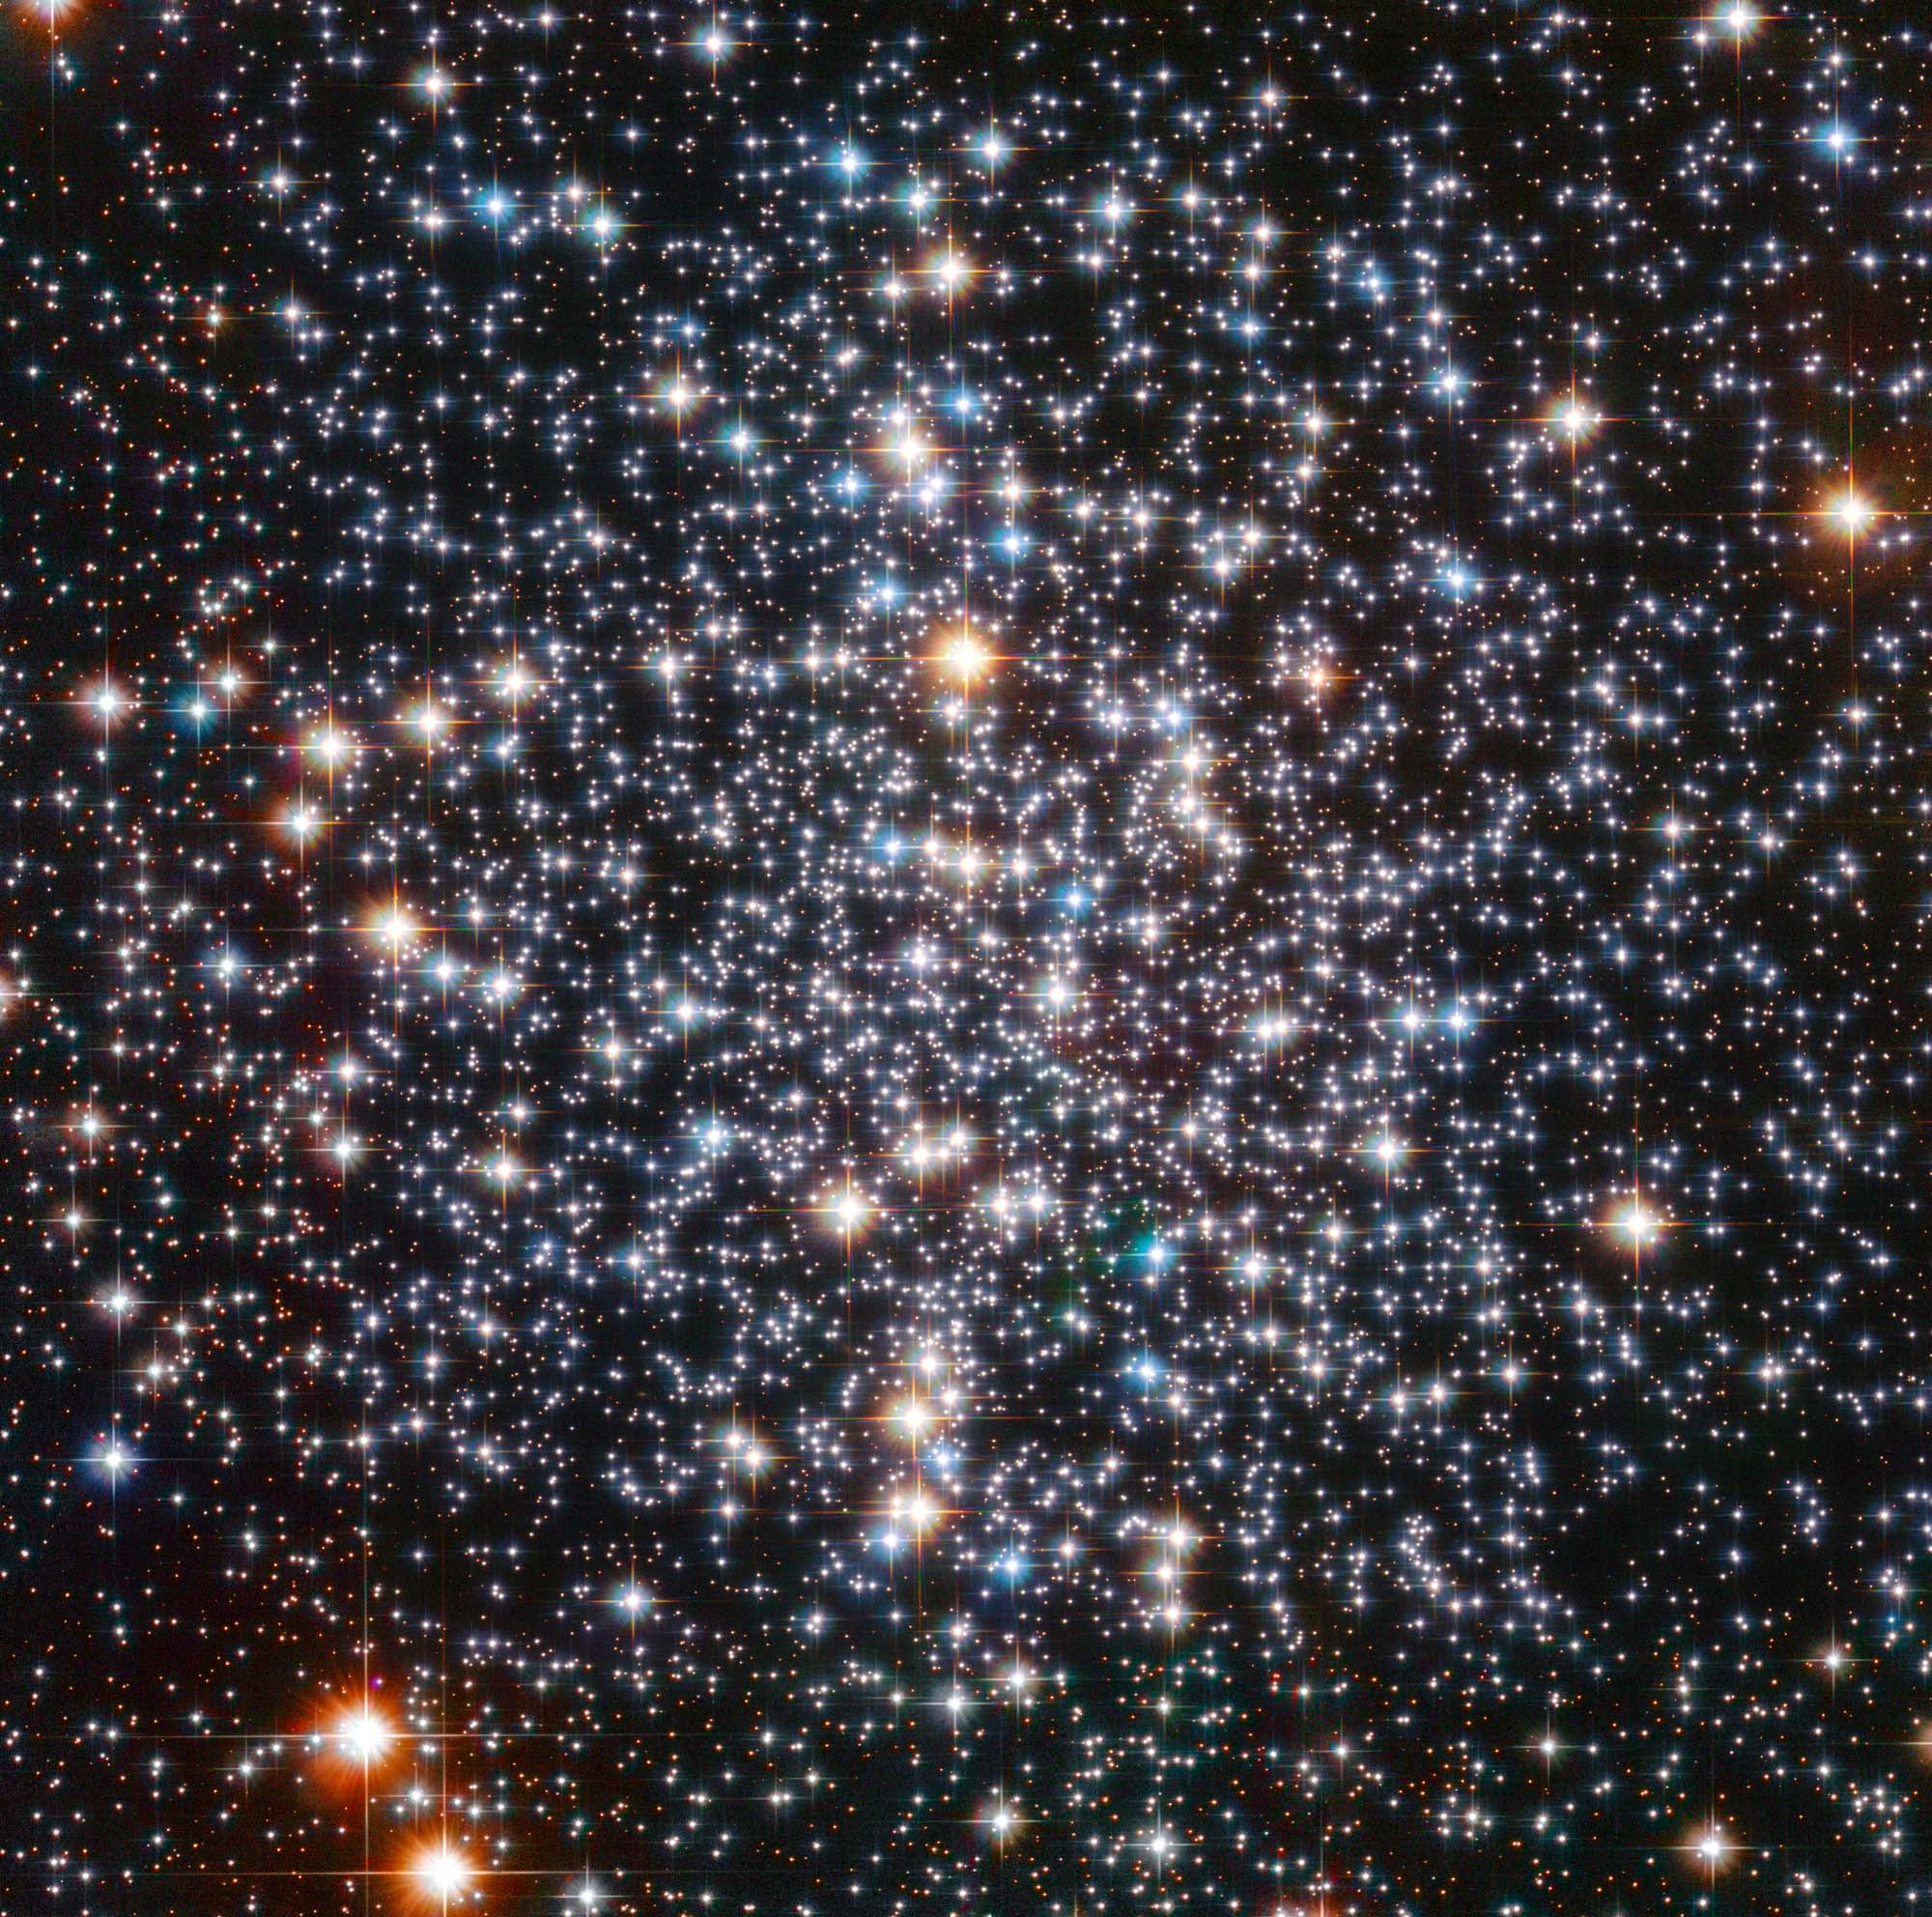 Thousands of bright points of light on a black background fill the field of view. They appear somewhat more concentrated near the center of the image. They have a variety of colors, with the most prominent stars appearing blue or yellow-orange. The brighter stars also display four diffraction spikes.